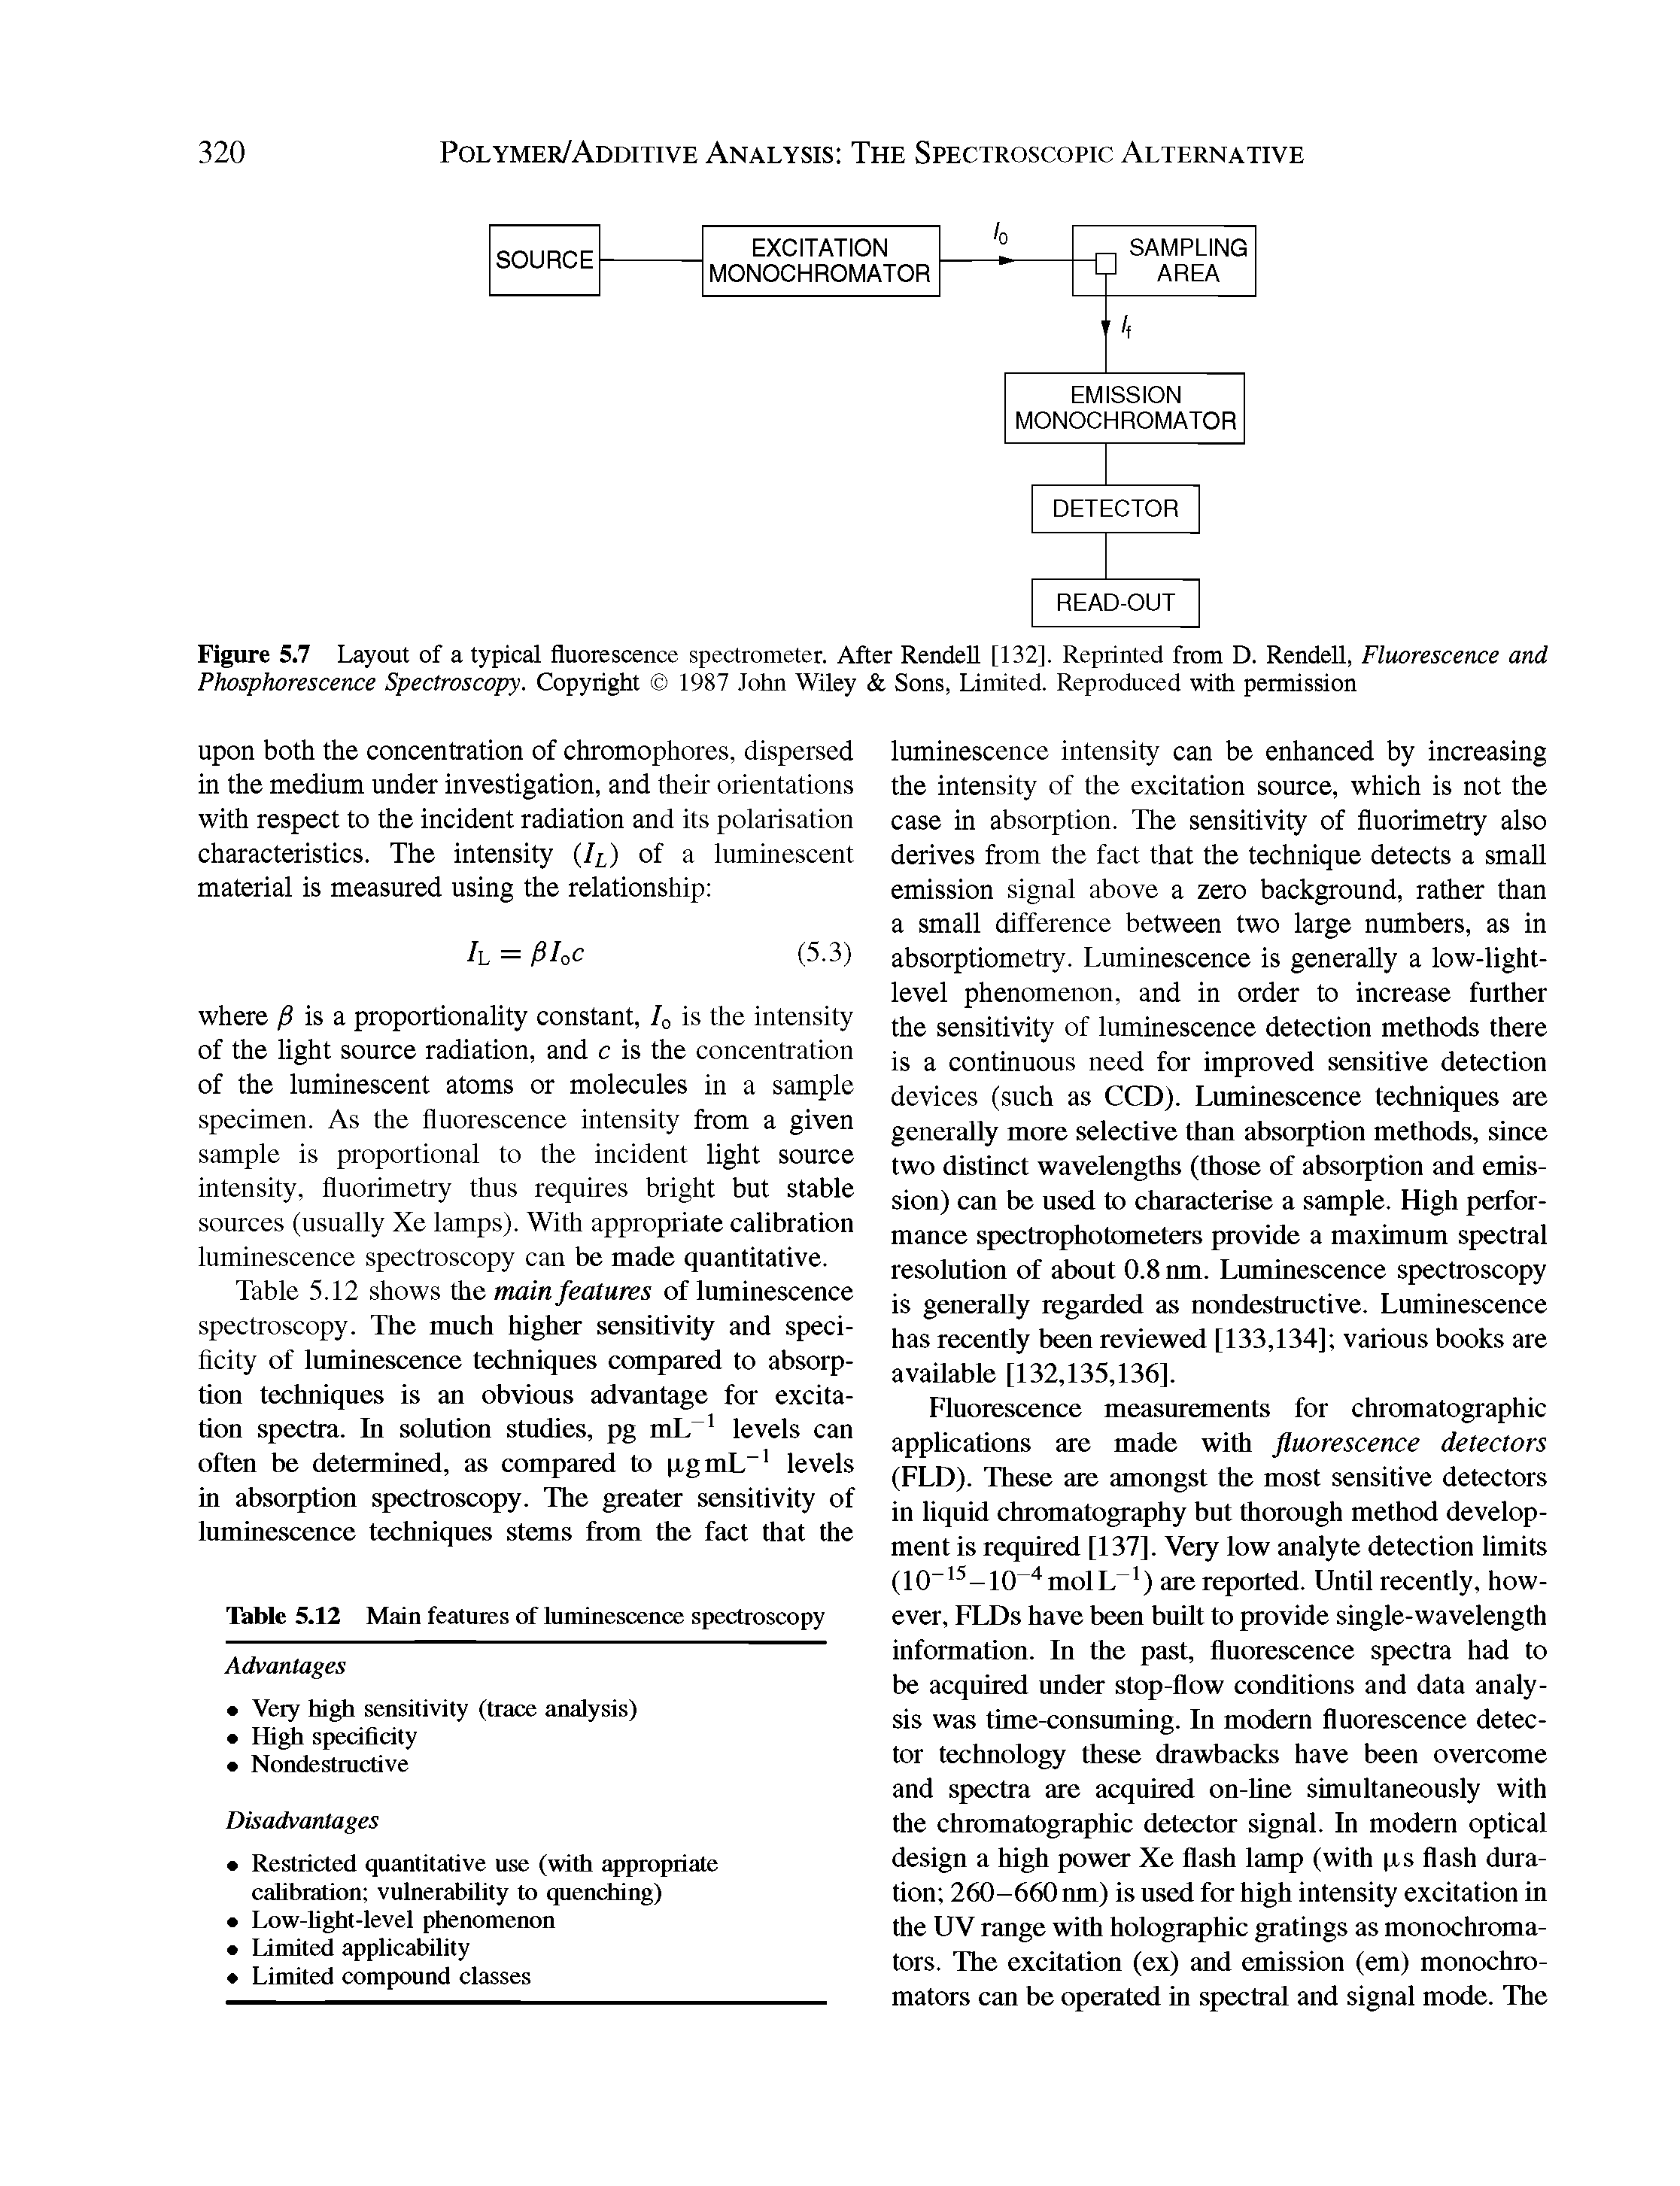 Figure 5.7 Layout of a typical fluorescence spectrometer. After Rendell [132]. Reprinted from D. Rendell, Fluorescence and Phosphorescence Spectroscopy. Copyright 1987 John Wiley Sons, Limited. Reproduced with permission...